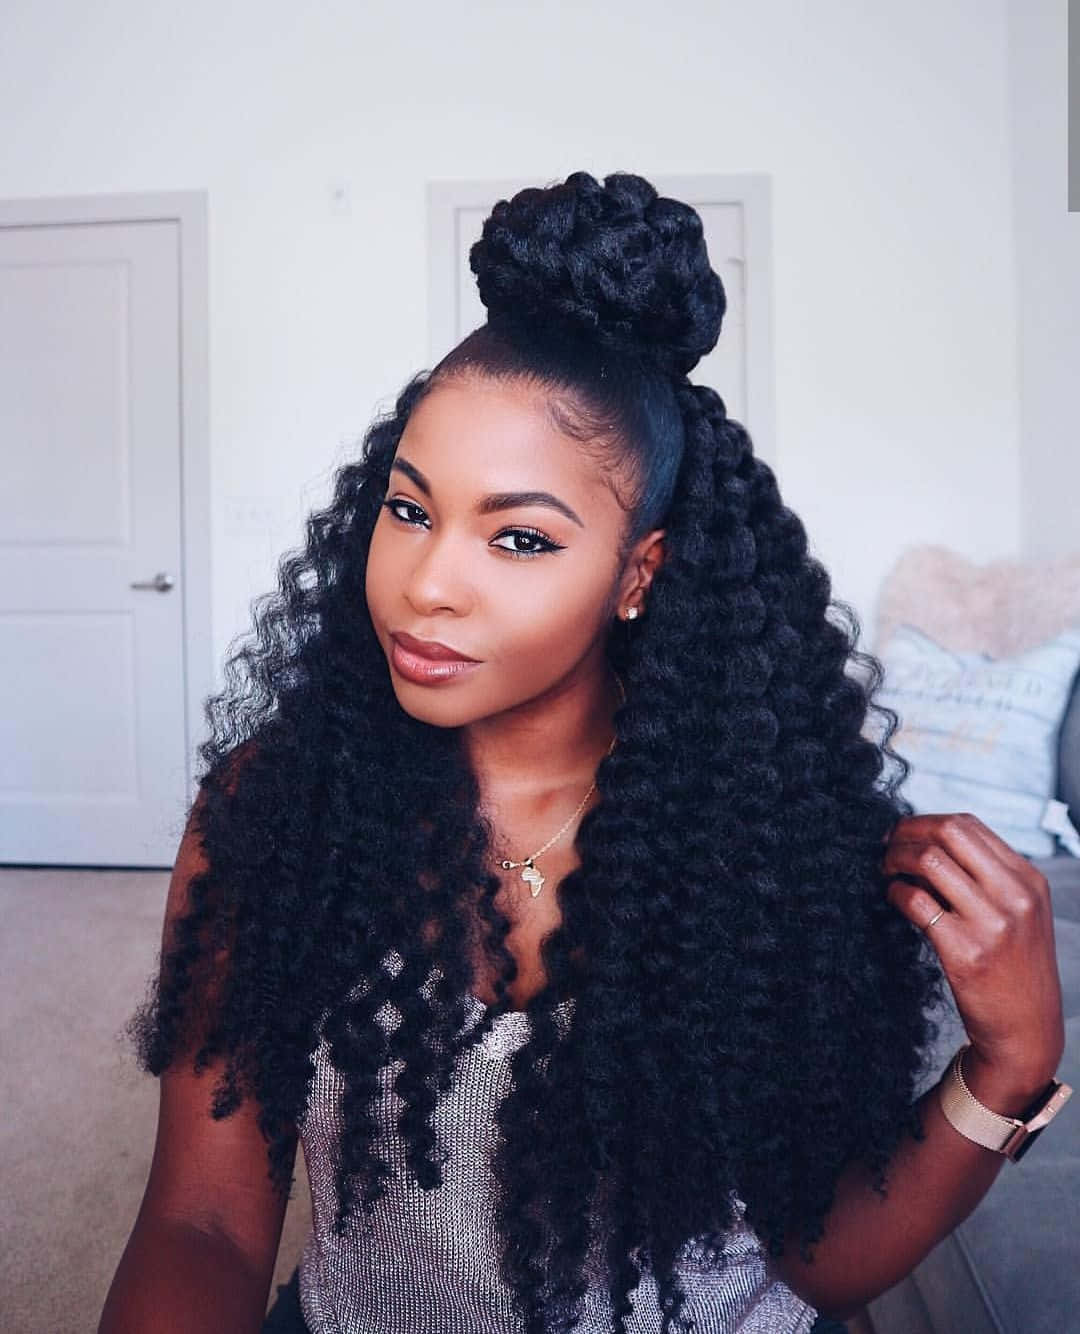 Aesthetic Woman Crochet Hair Styles Picture